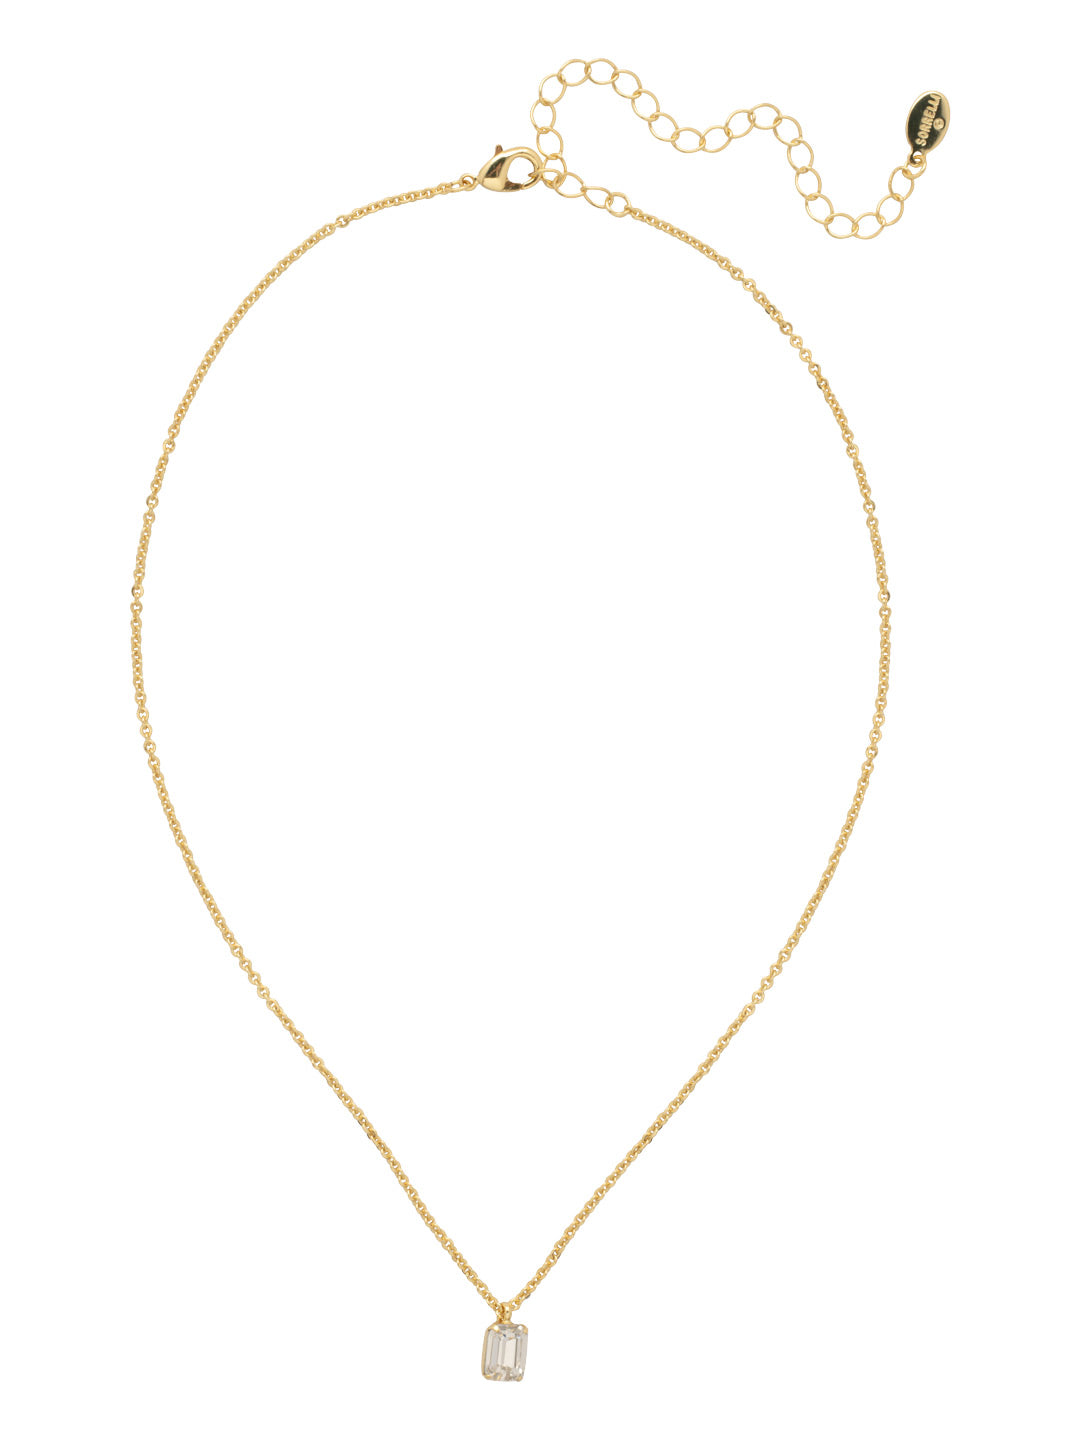 Petite Emerald Pendant Necklace - NFM13BGCRY - <p>The Petite Emerald Pendant Necklace features a small emerald cut crystal on an adjustable chain, secured by a lobster claw clasp. From Sorrelli's Crystal collection in our Bright Gold-tone finish.</p>